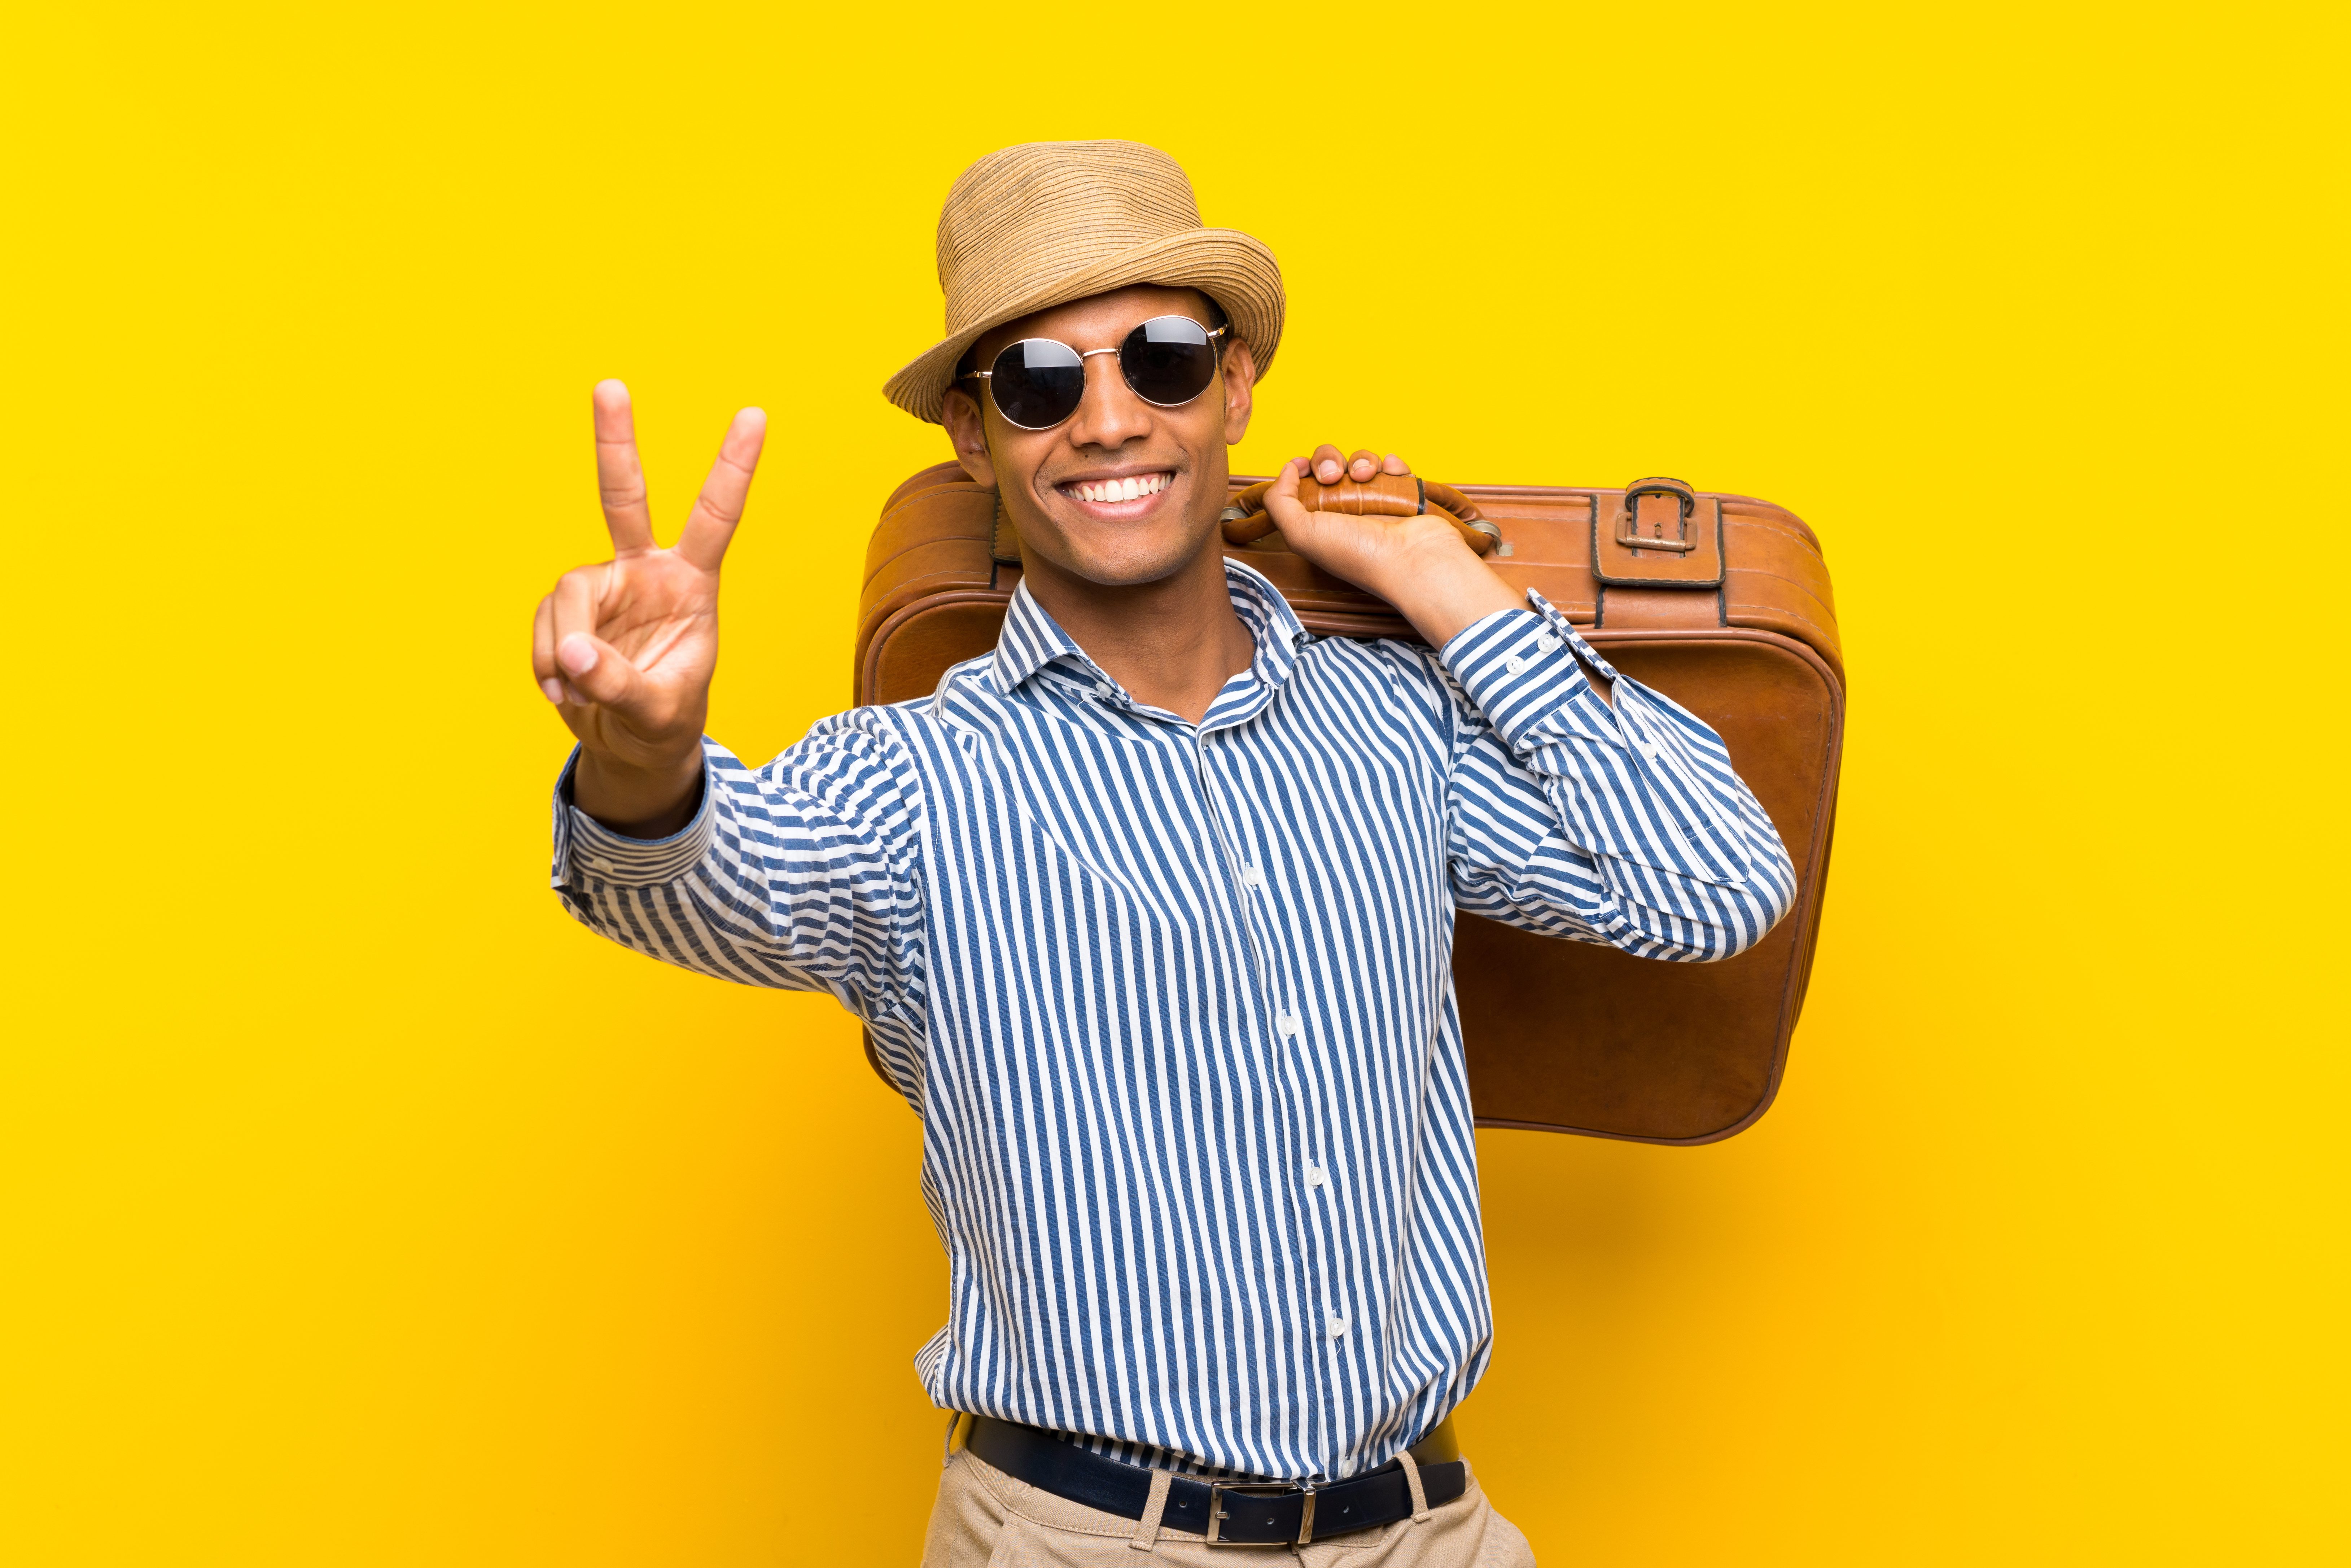 Brunette man holding a vintage briefcase over isolated yellow background smiling and showing victory sign